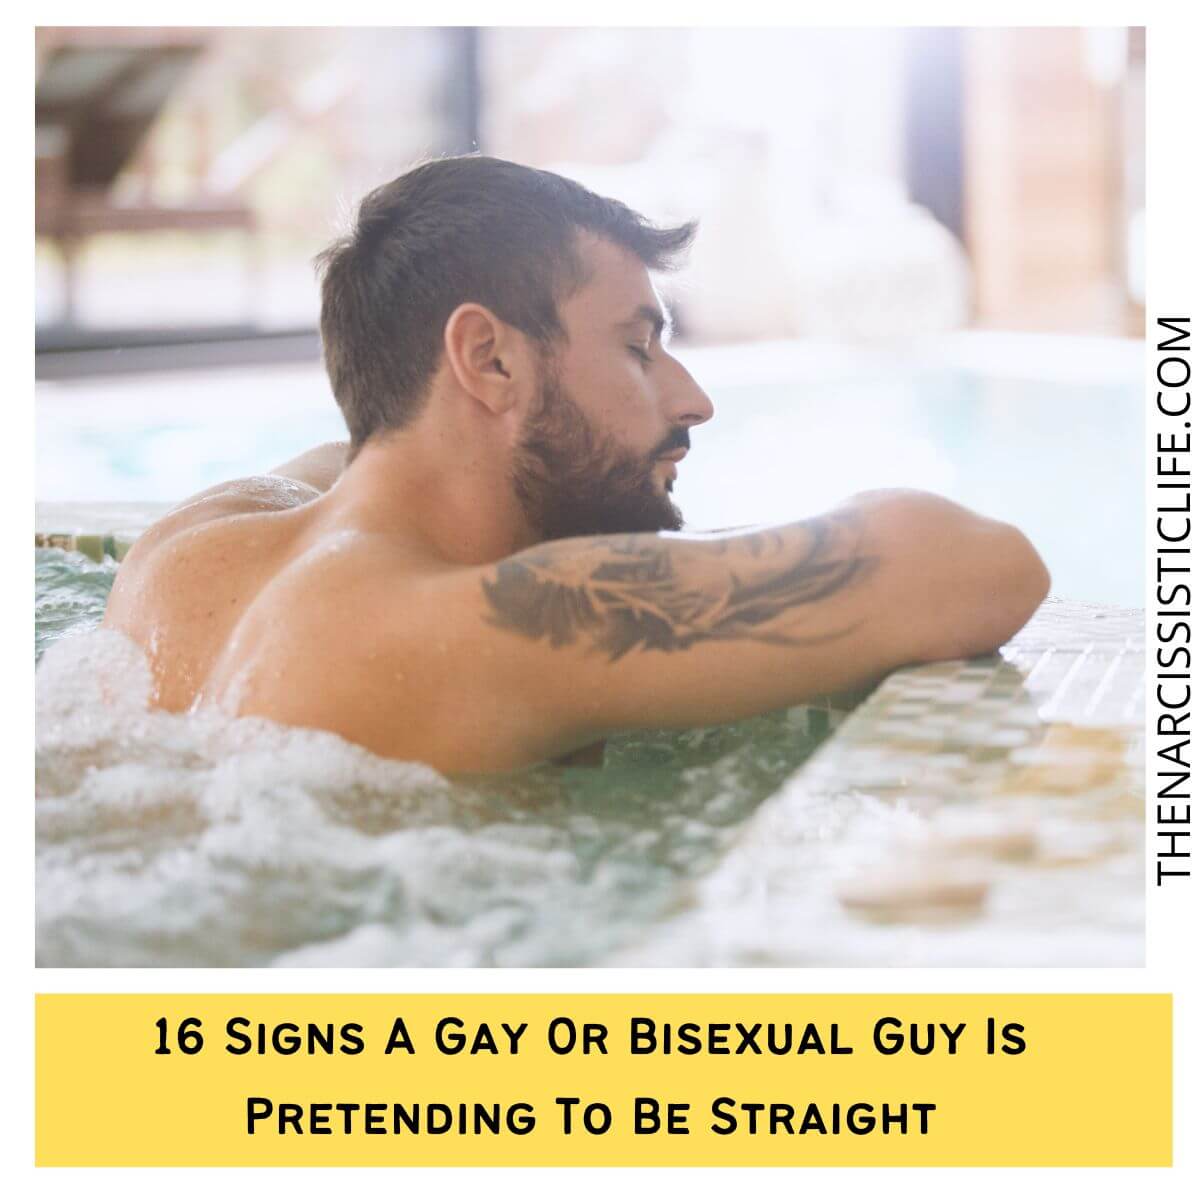 My Husband Is Gay Porn - 16 Signs A Guy Is Pretending To Be Straight - The Narcissistic Life